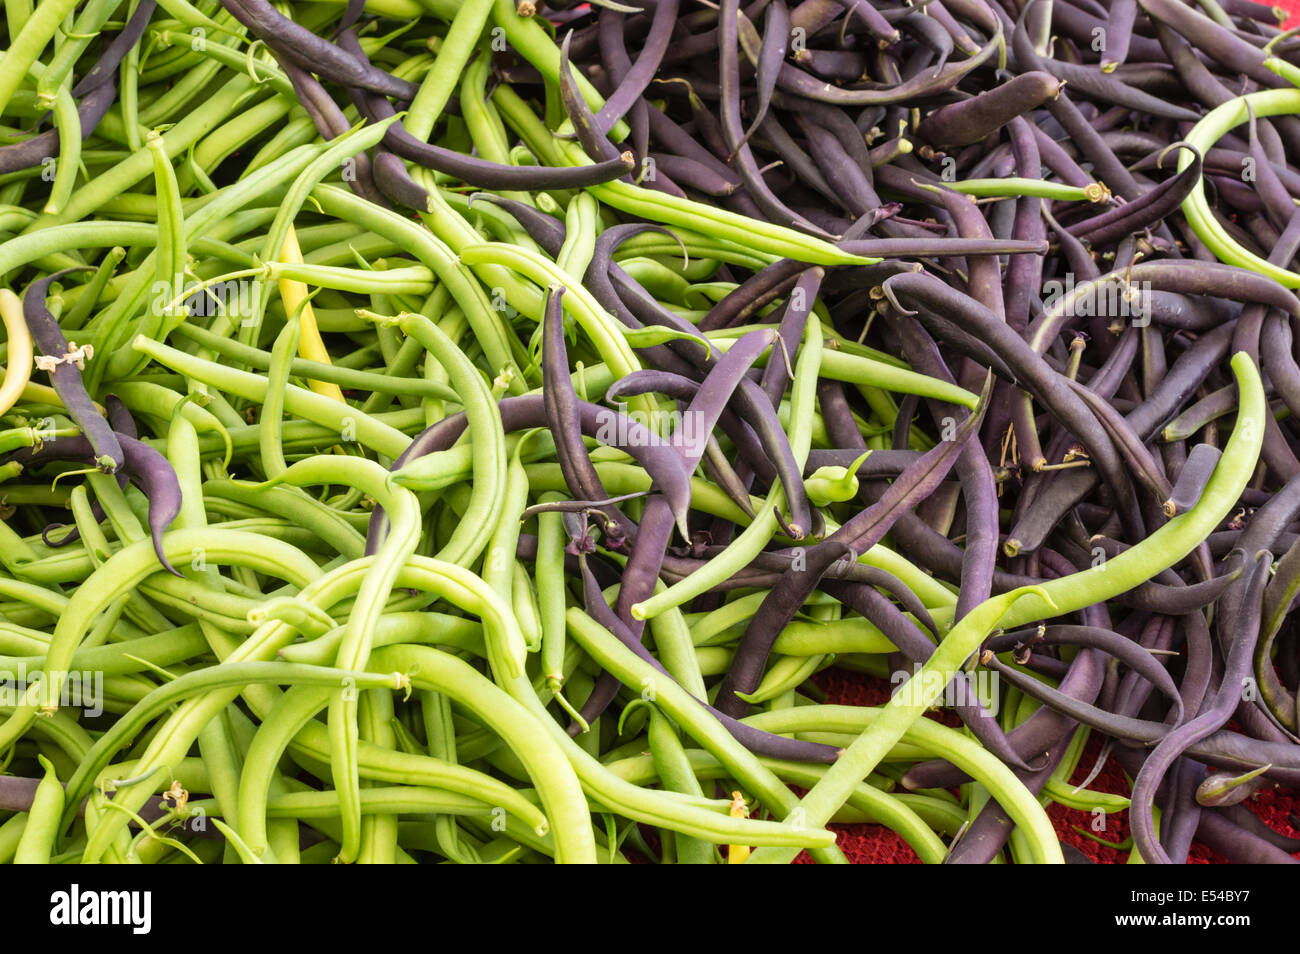 Fresh picked green and purple beans at the farmers market Stock Photo